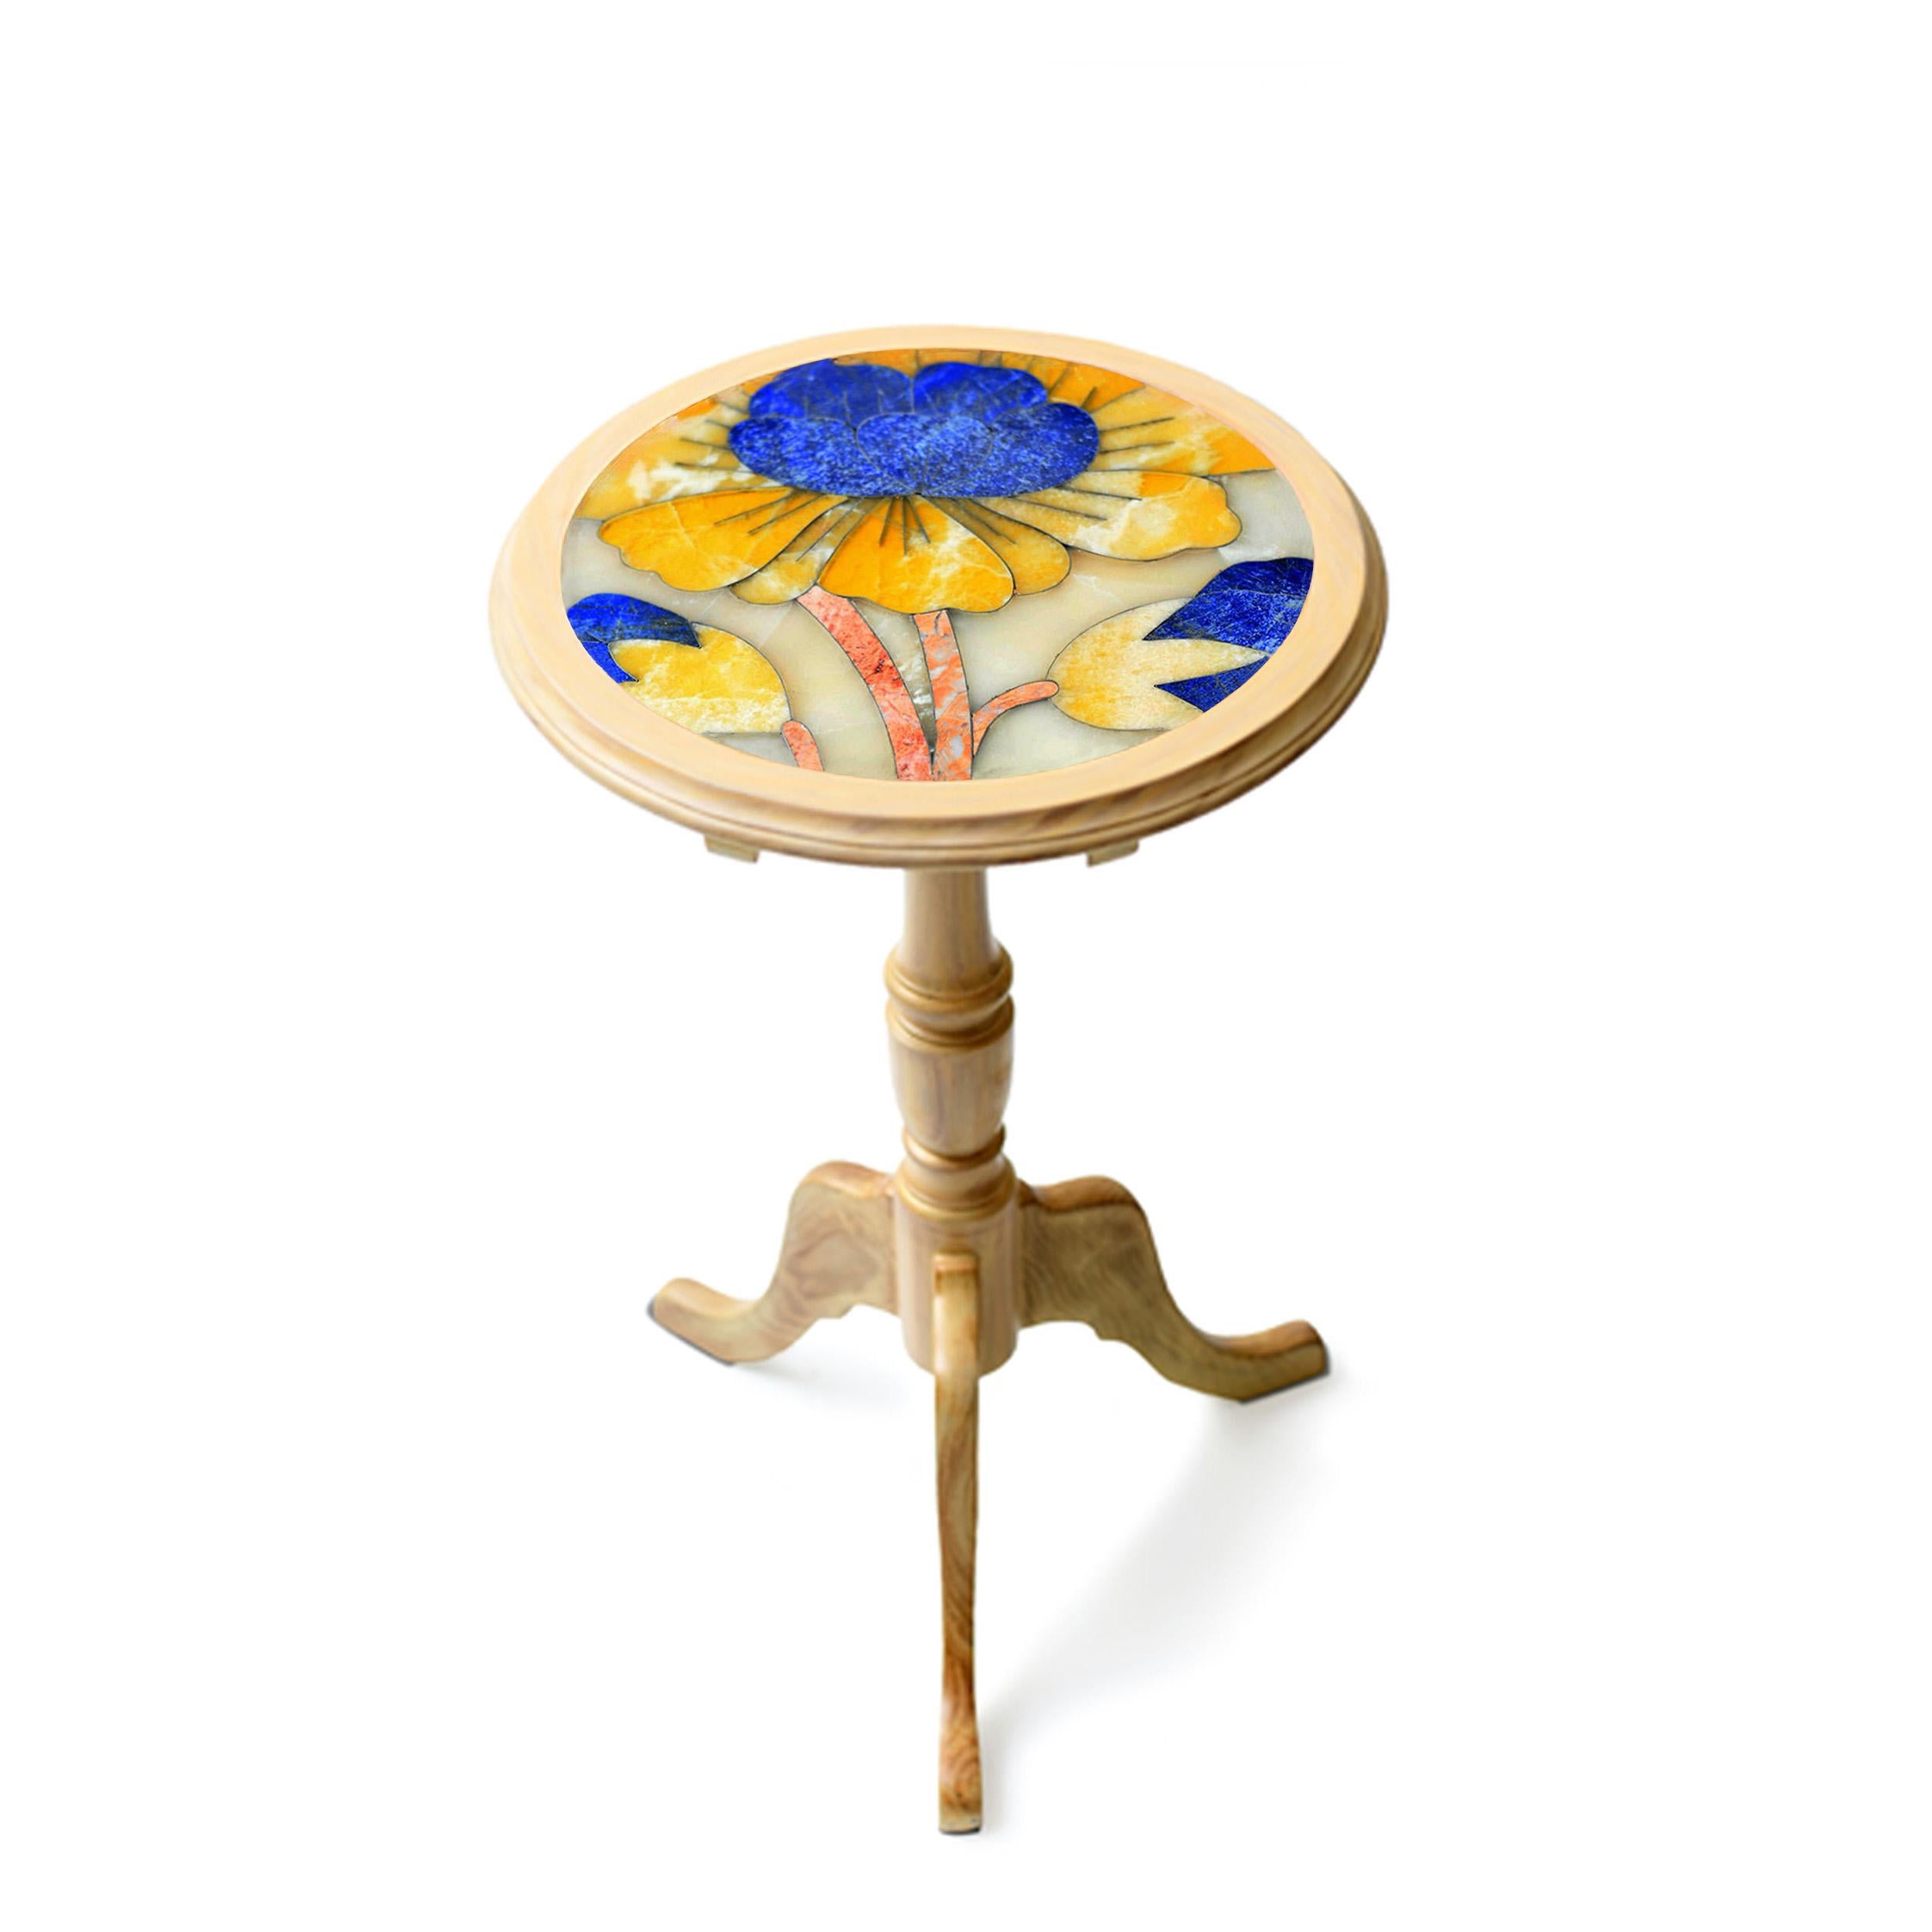 Puvvi tilt-top yellow side table by Studio Lel
Dimensions: D46 x W46 x H66 cm
Materials:Lapis Lazuli, Onyx, marble, wood

From the Urdu word for the chrysanthemum flower, our Vogue-featuring Puvvi collection is a lively celebration of